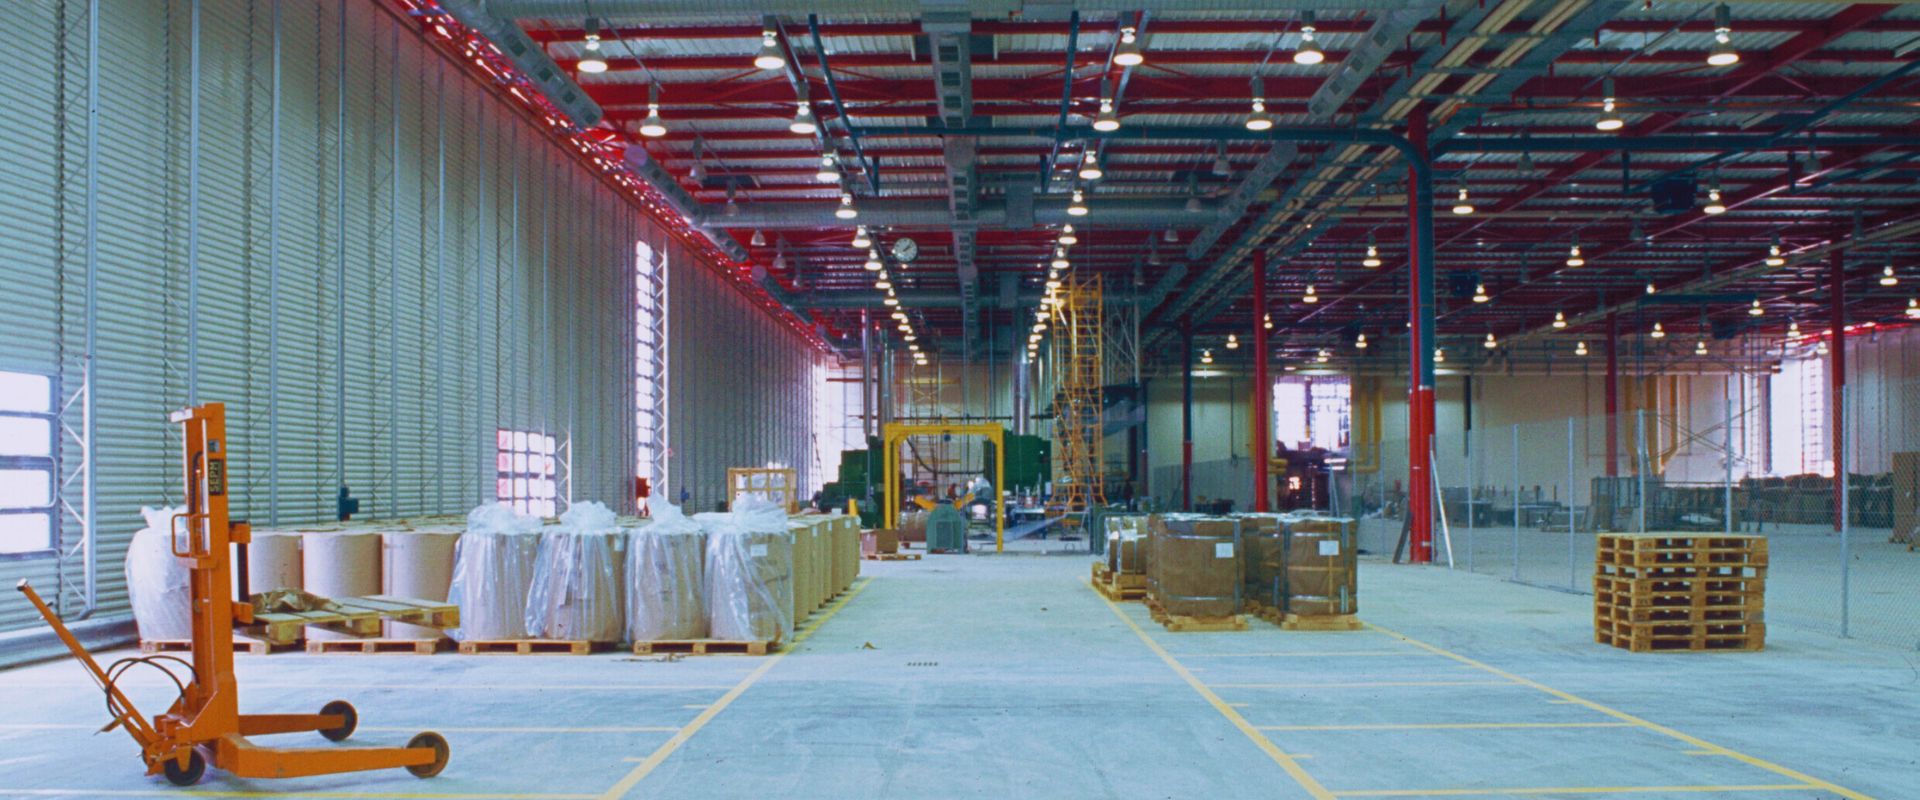 Oxytech Fire Safety Systems: Protecting Your Warehouse from Fire